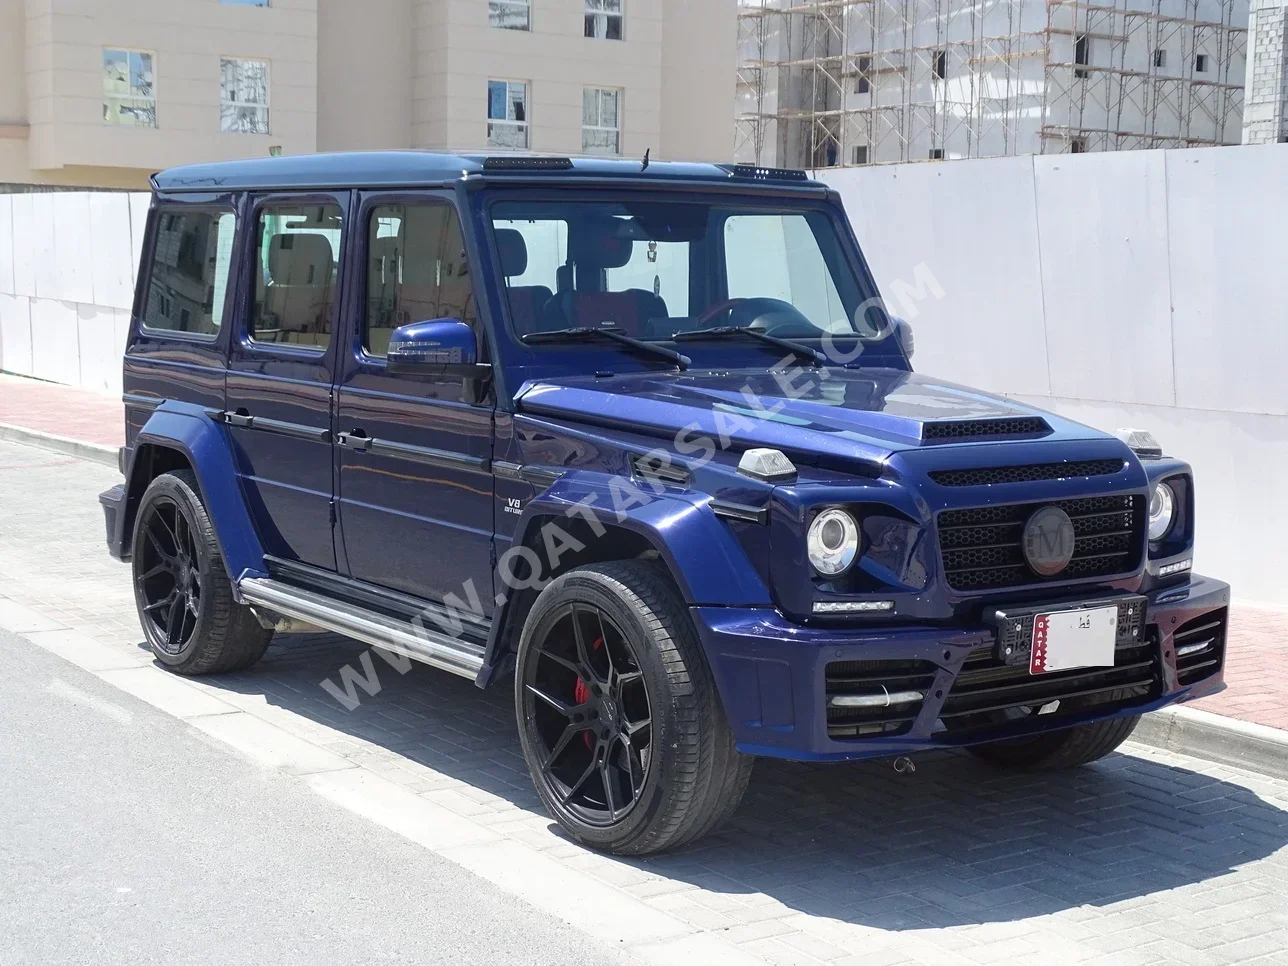 Mercedes-Benz  G-Class  63 AMG  2015  Automatic  89,000 Km  8 Cylinder  Four Wheel Drive (4WD)  SUV  Blue